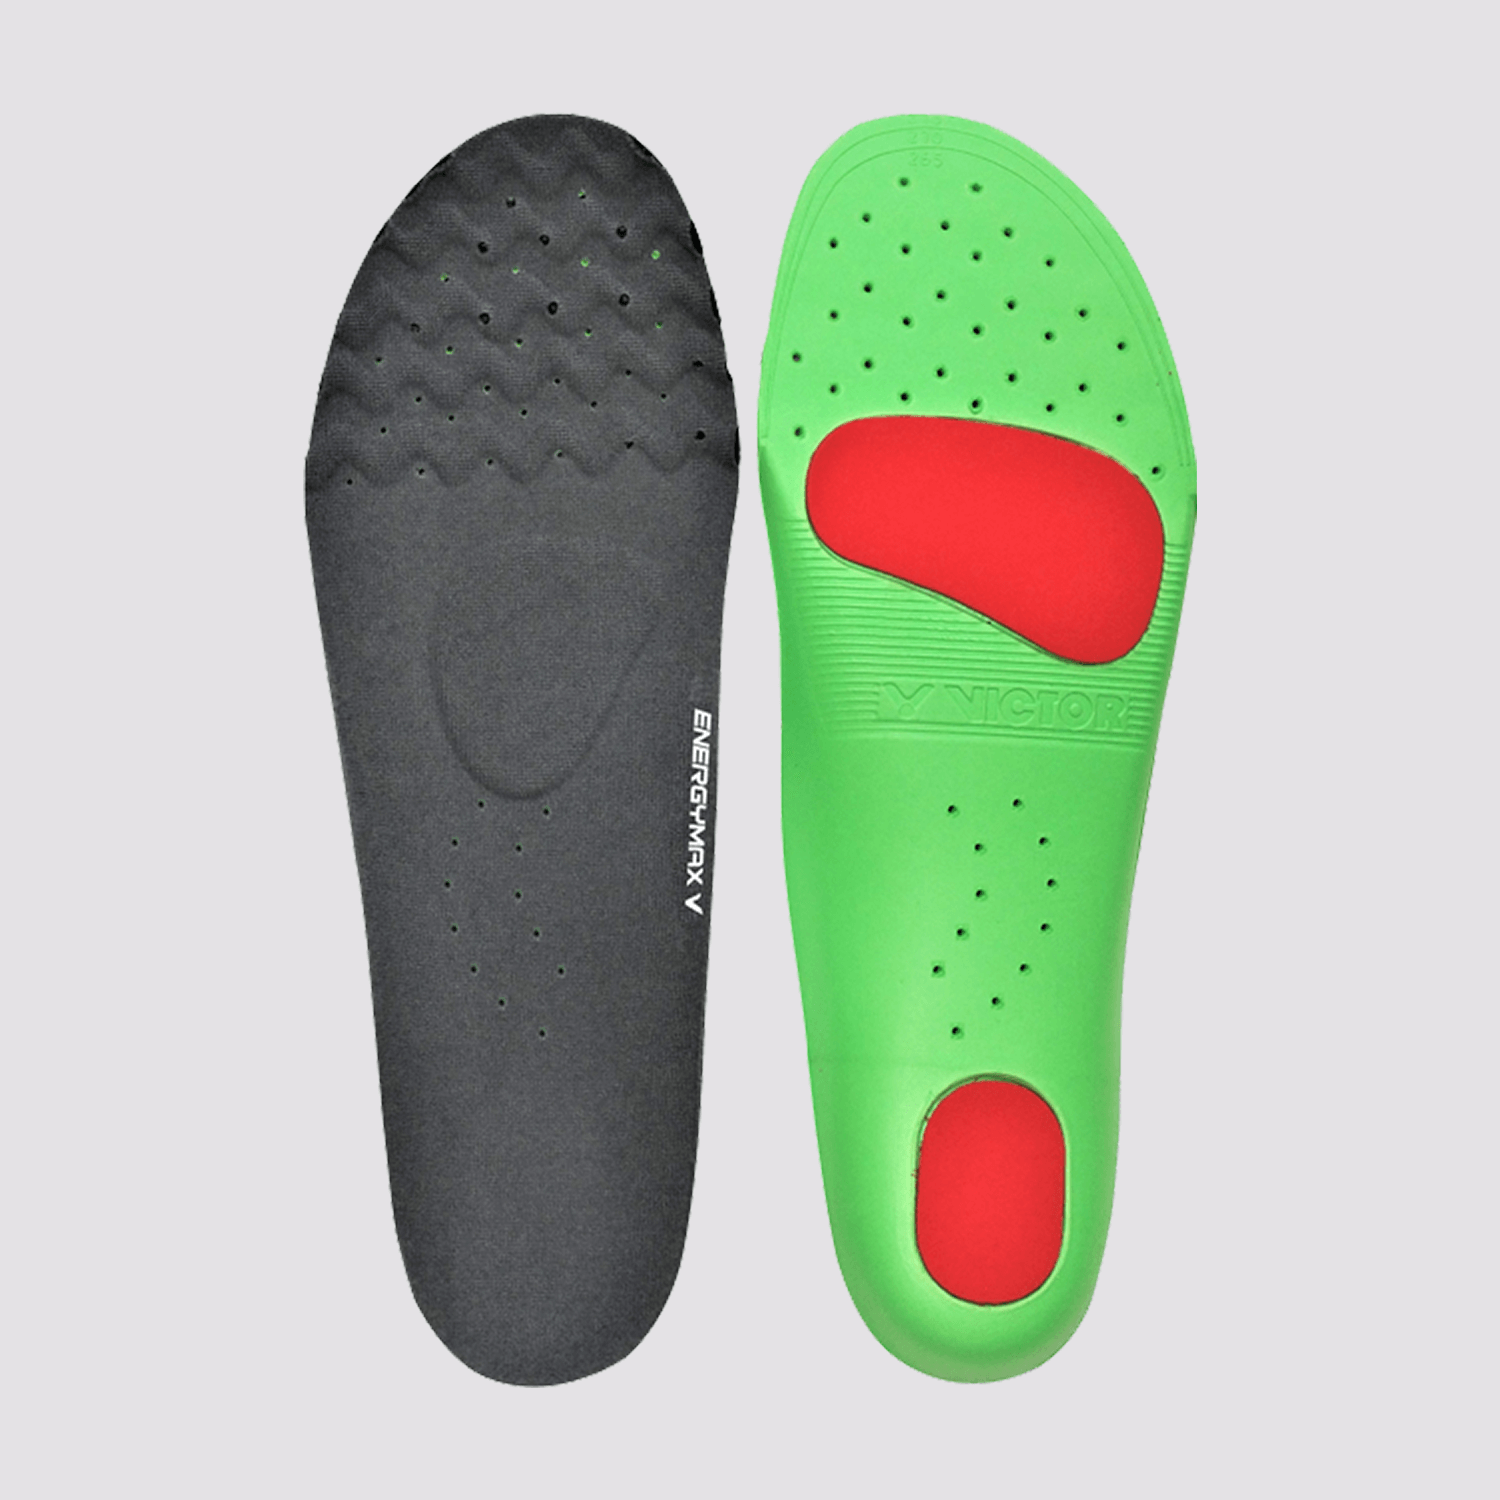 Victor Badminton Shoe Insole VT-XD11 H X (Green)